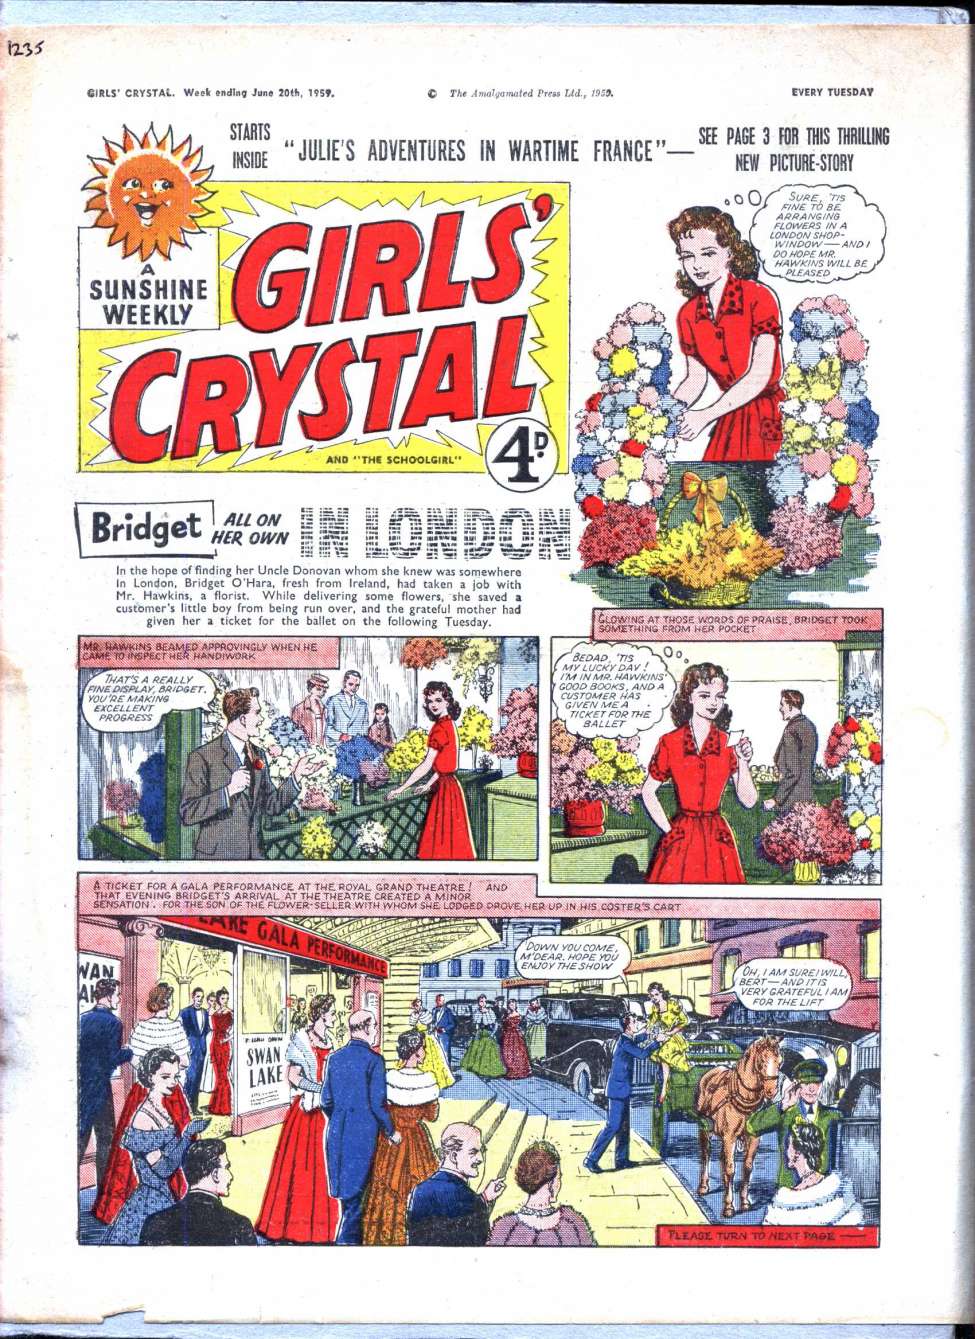 Book Cover For Girls' Crystal 1235 - Bridget All On Her Own In London